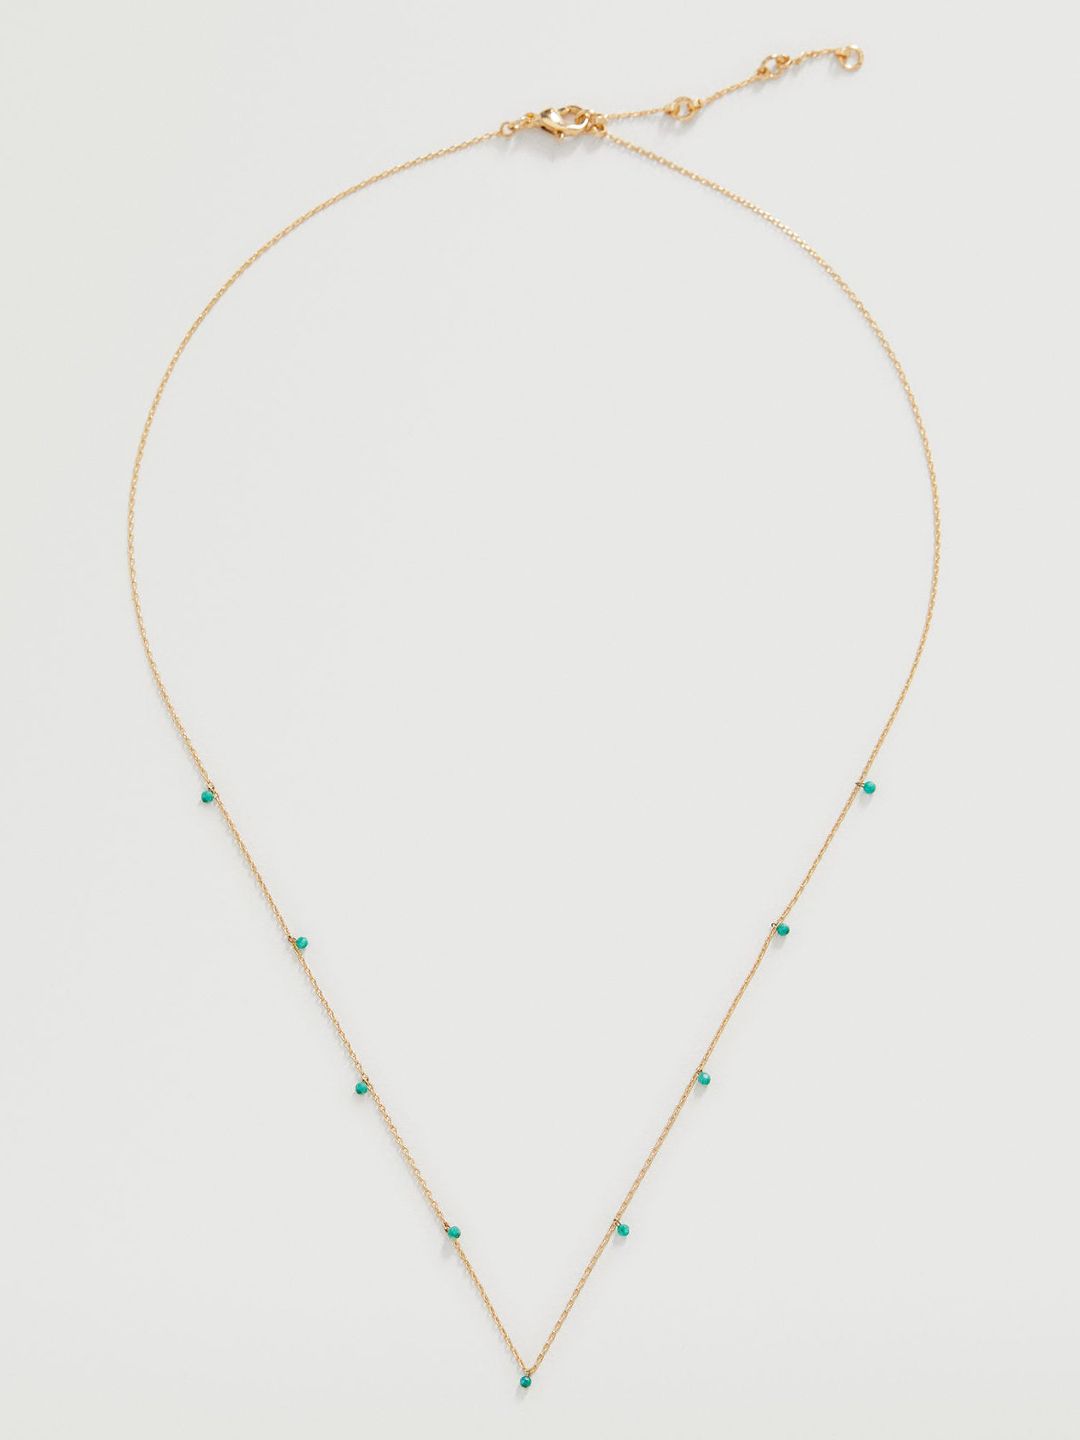 MANGO Gold-Toned & Green  Beaded Necklace Price in India